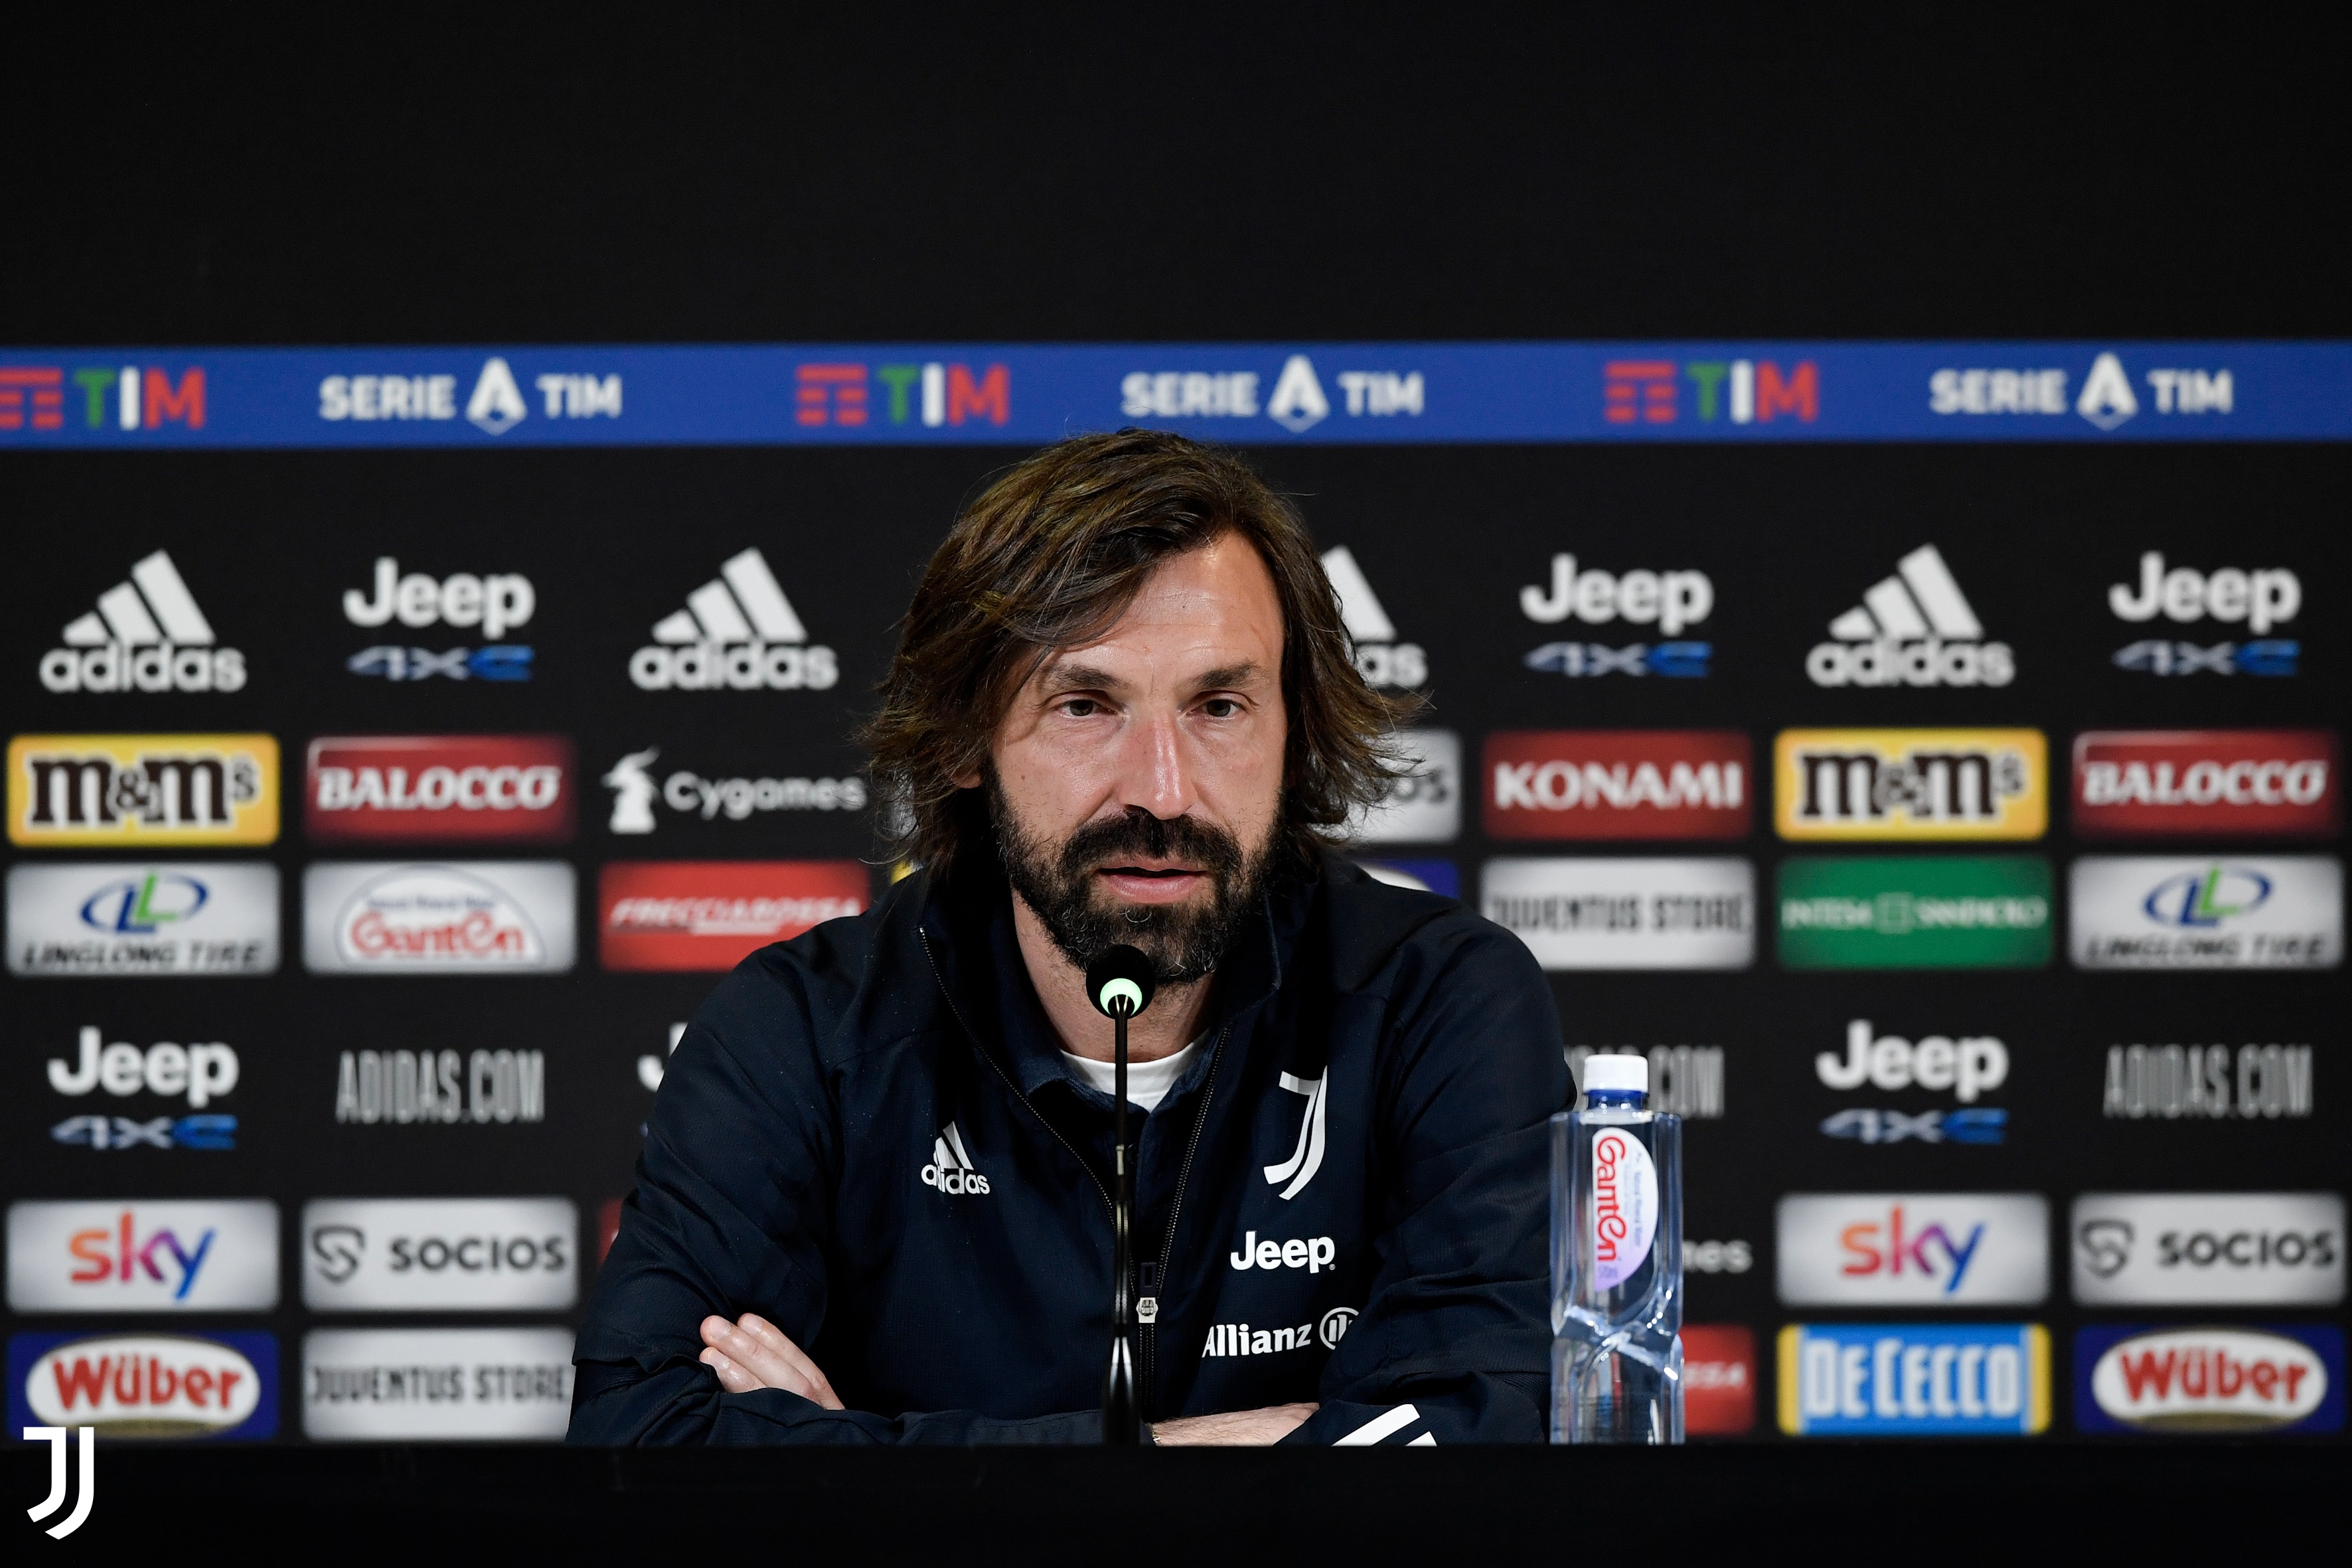 No I won’t step aside and I’ll continue my work as long as I’m allowed, admits Andrea Pirlo